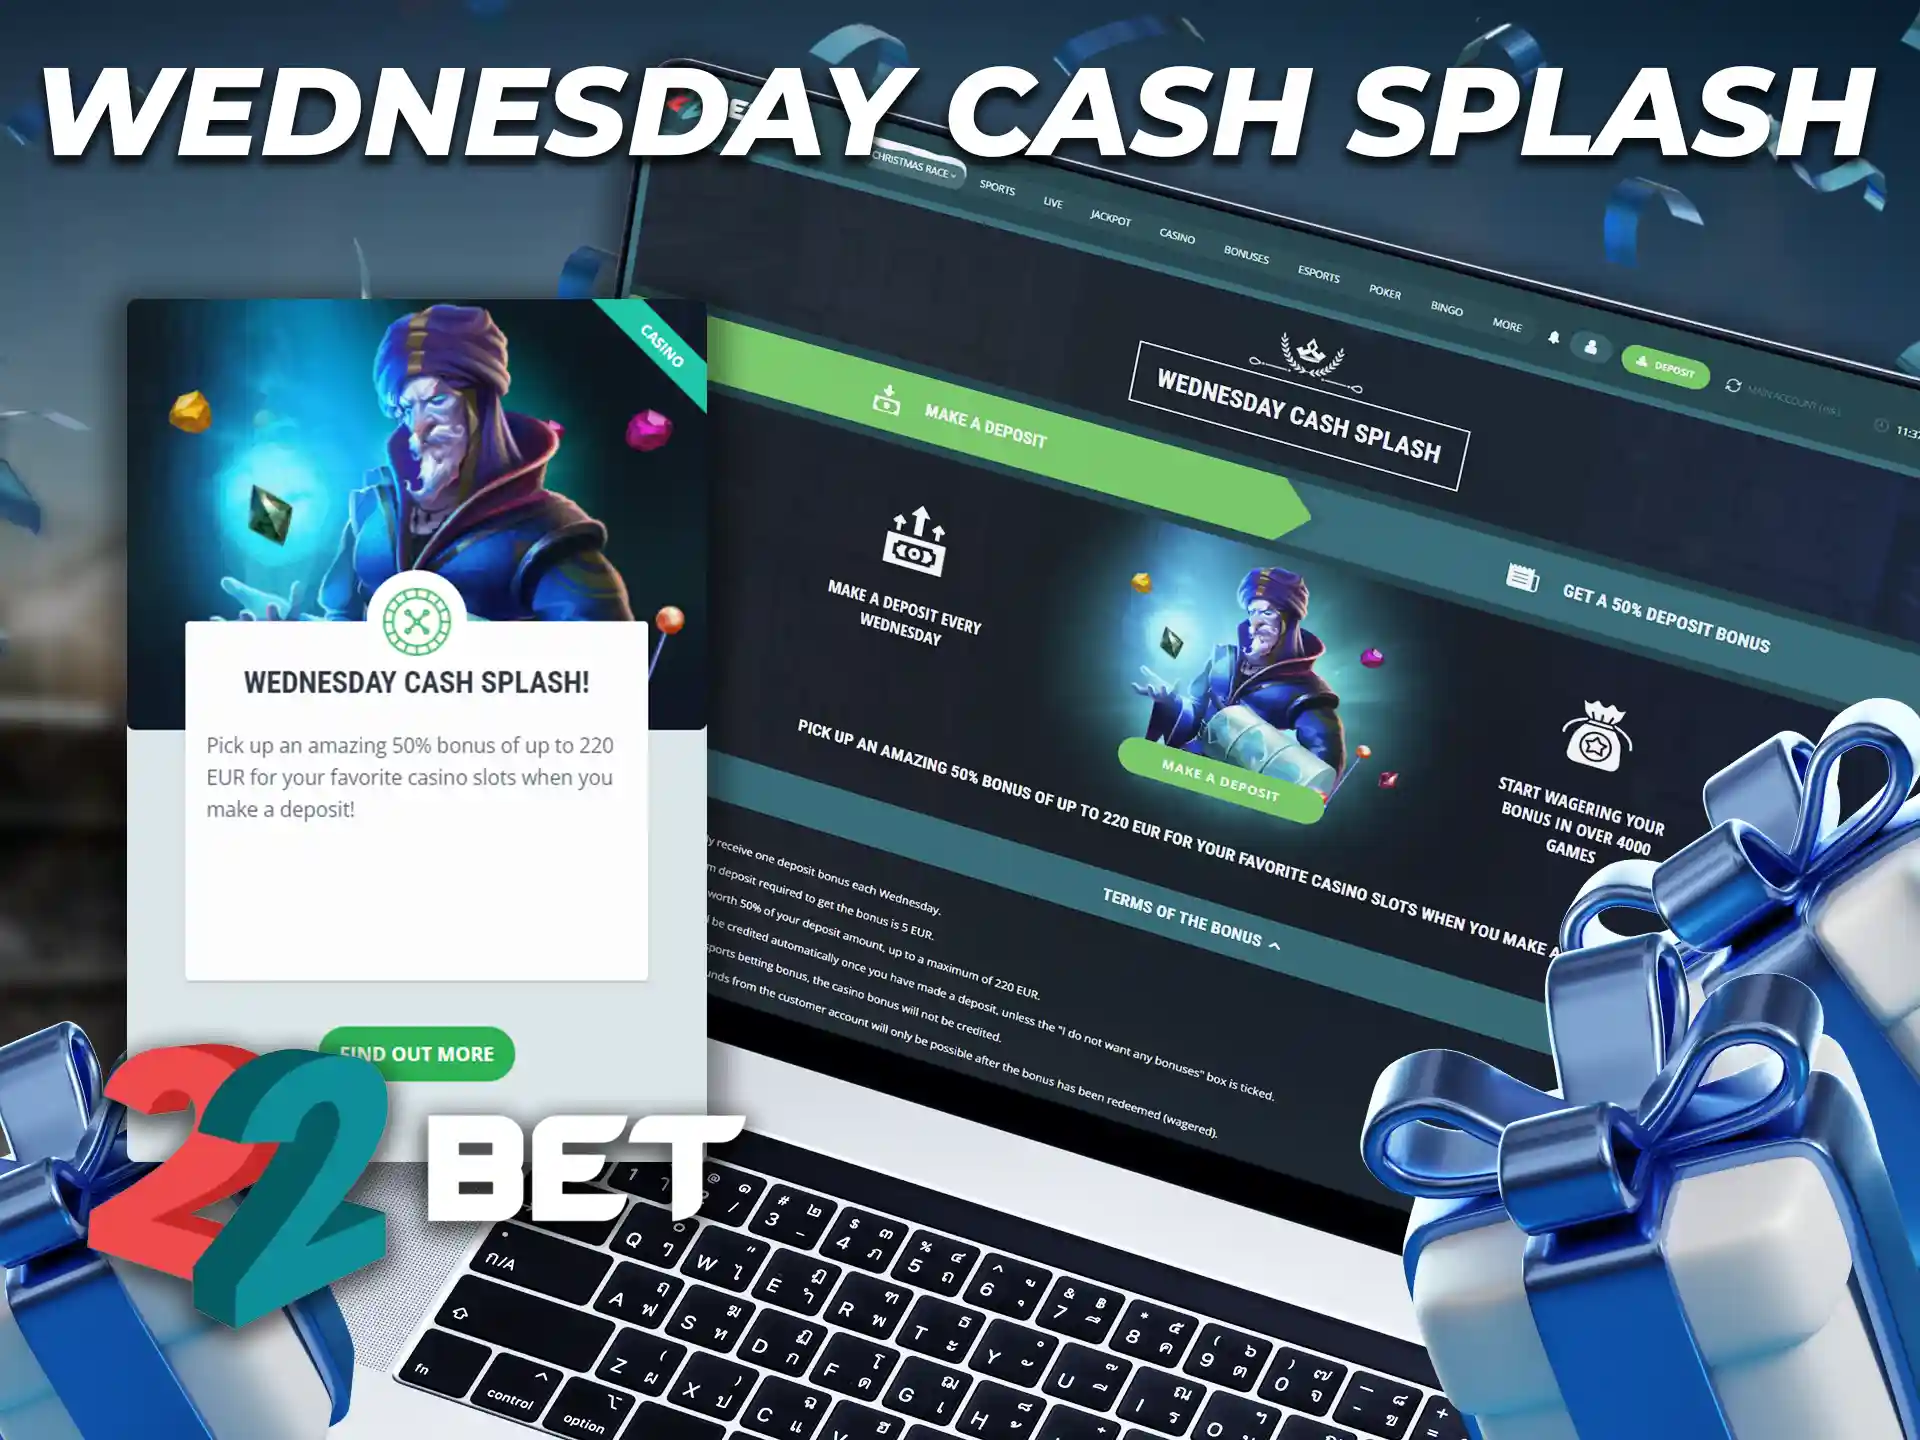 The Wednesday Cash Splash bonus is available in the Sports section.